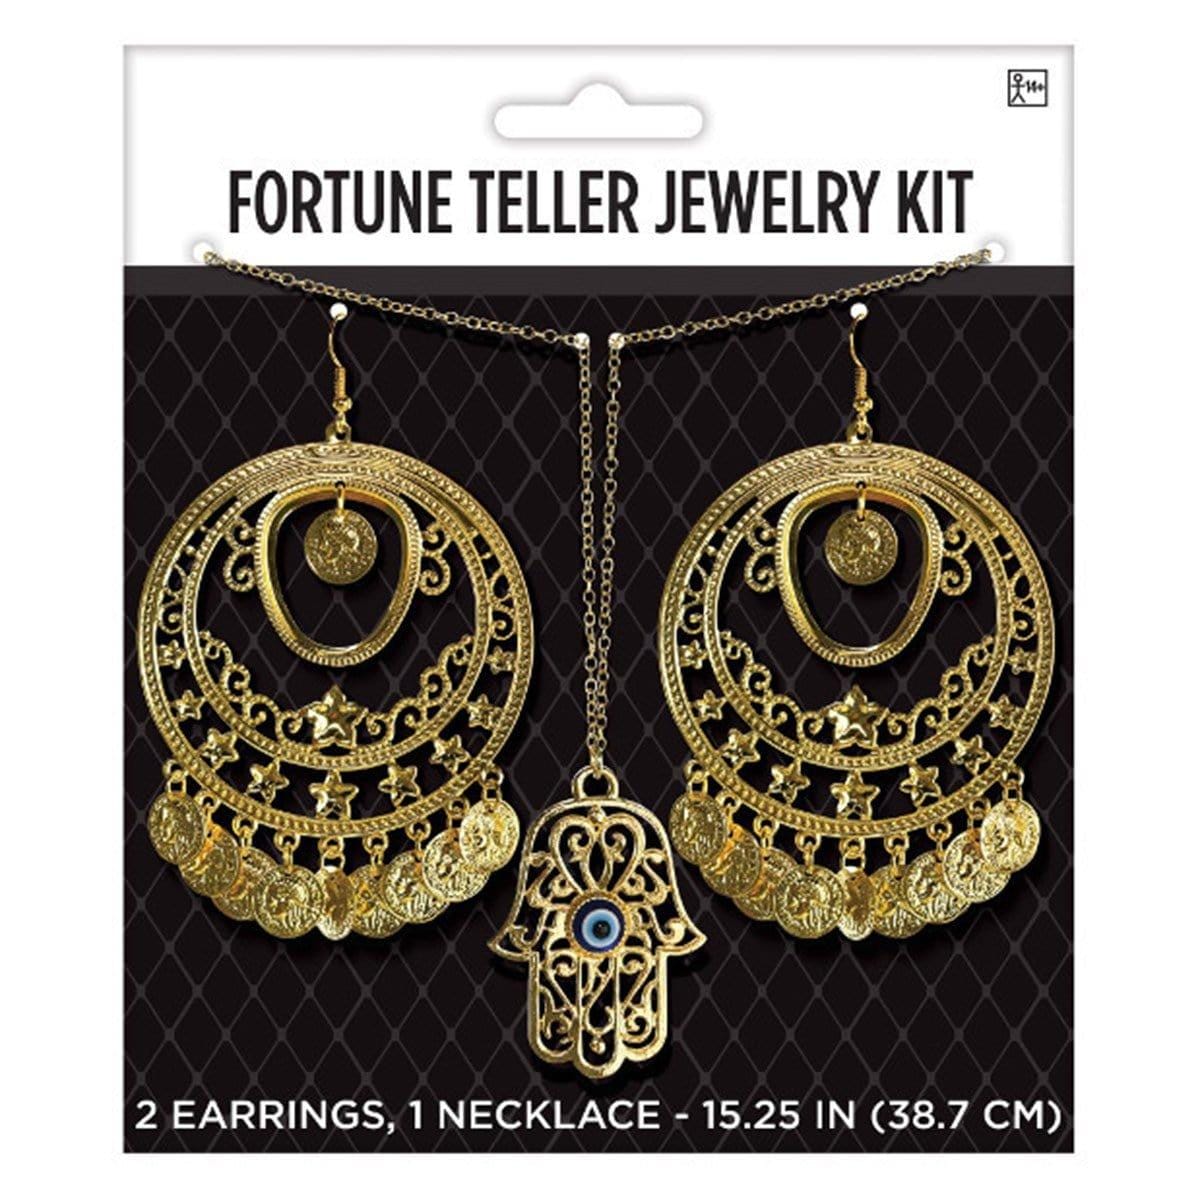 Buy Costume Accessories Fortune teller jewelry kit sold at Party Expert